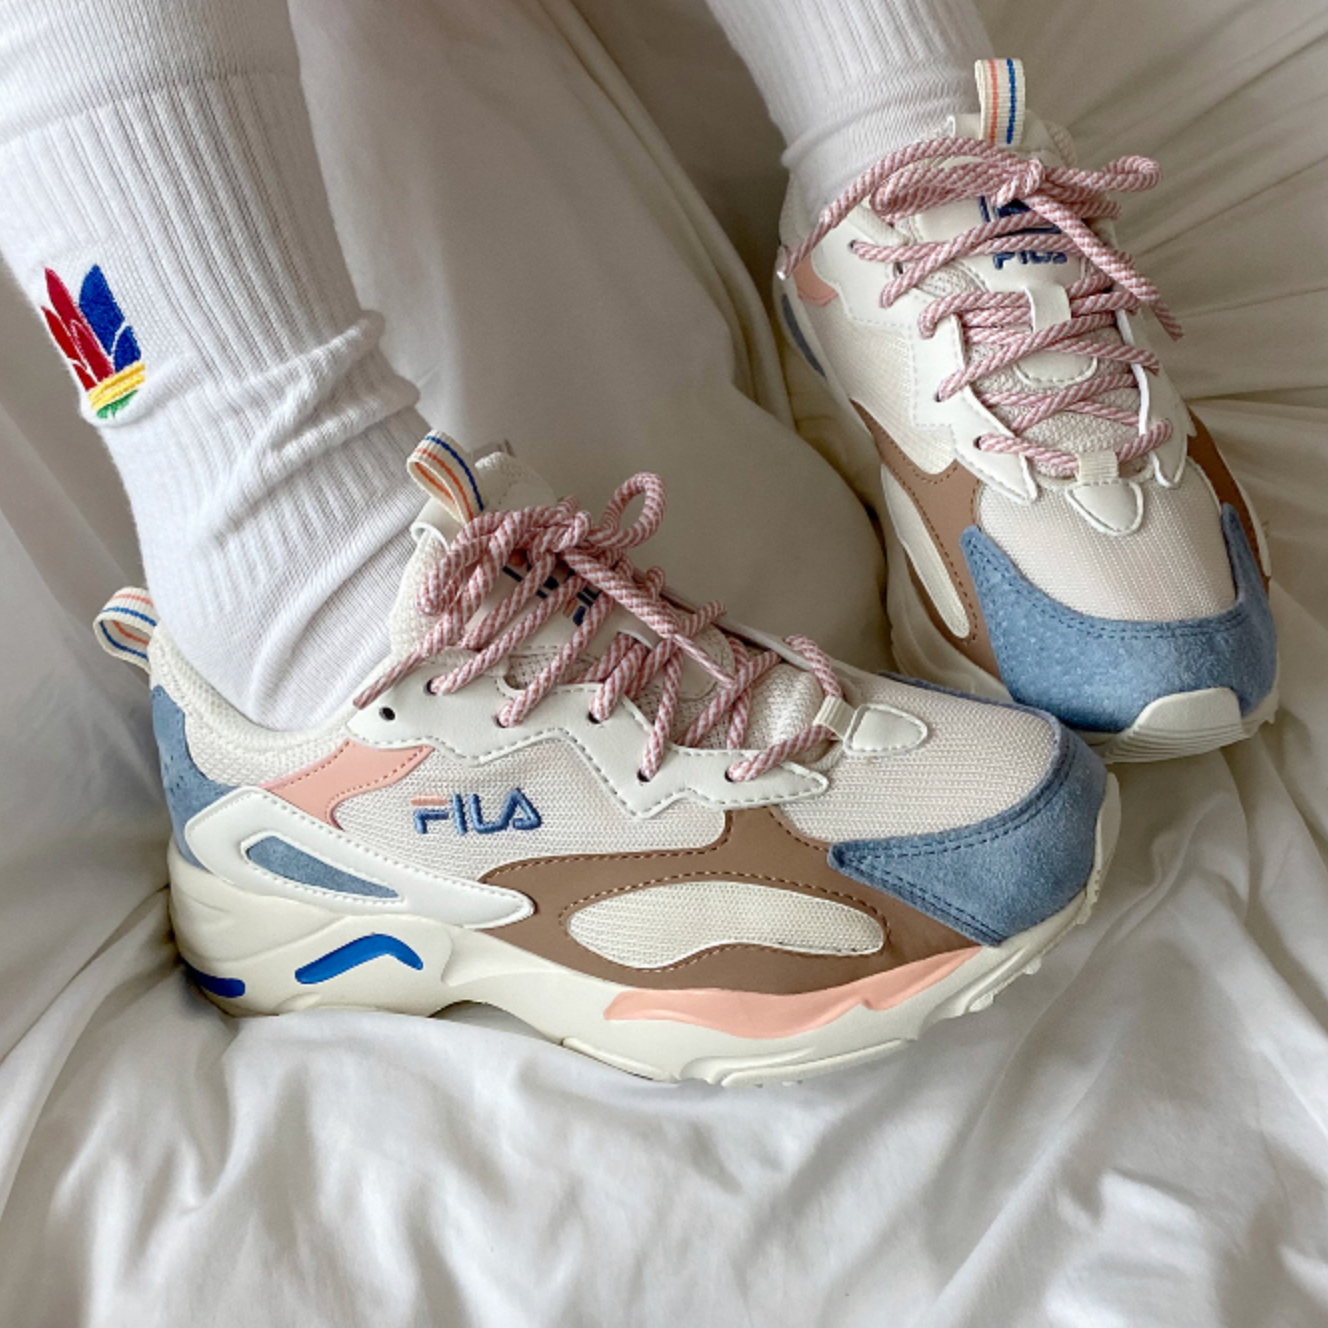 BF003 FILA RAY TR SHOES 結束) – Letta A